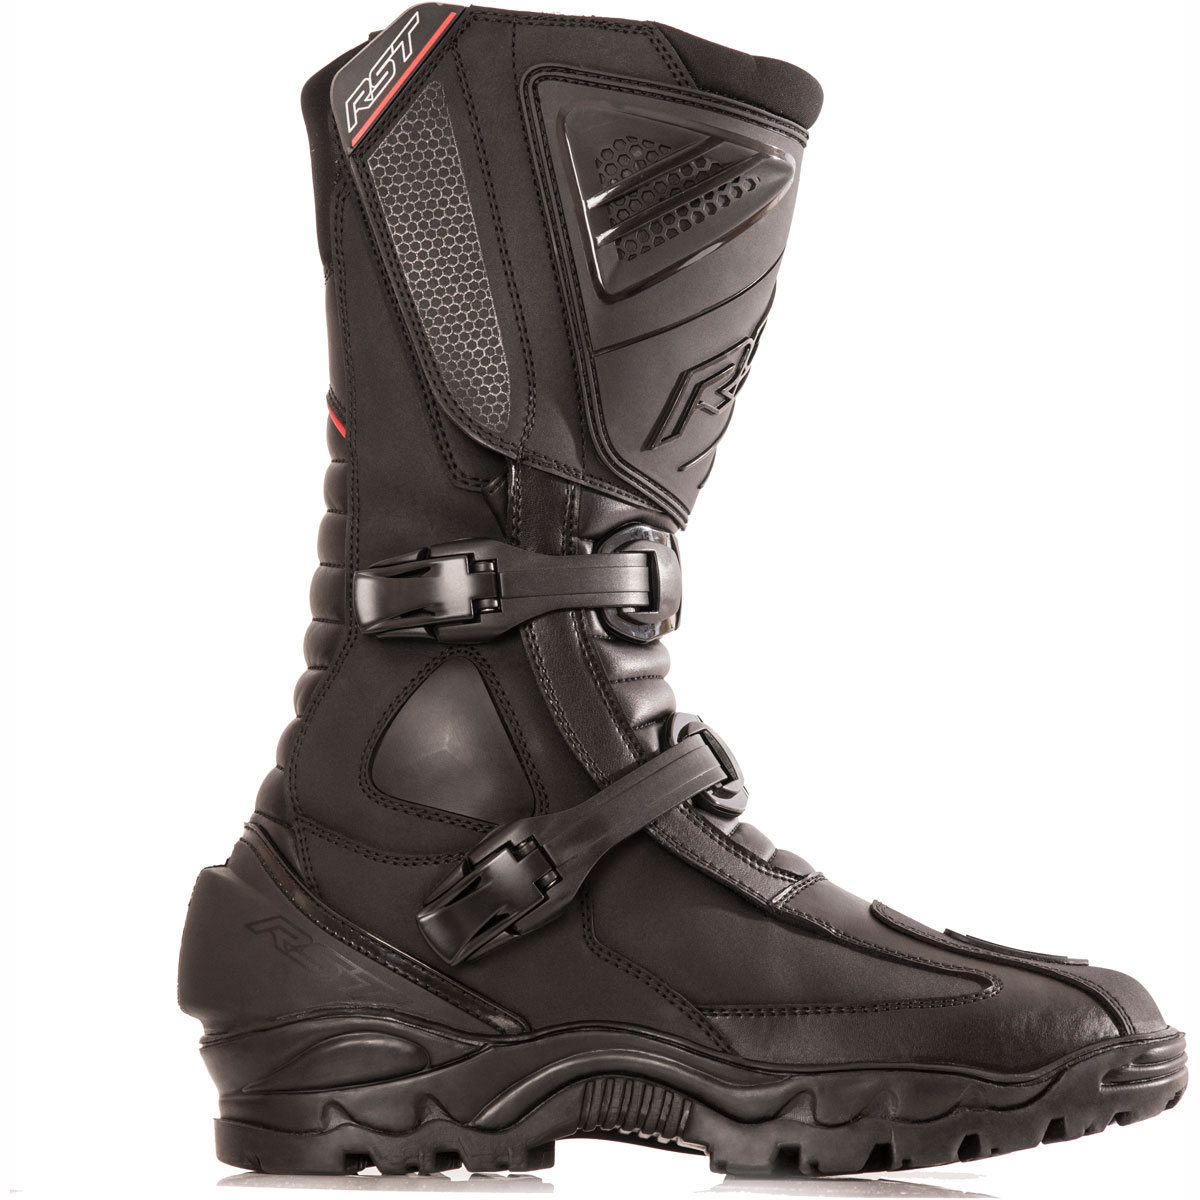 10 of the best adventure boots | Visordown